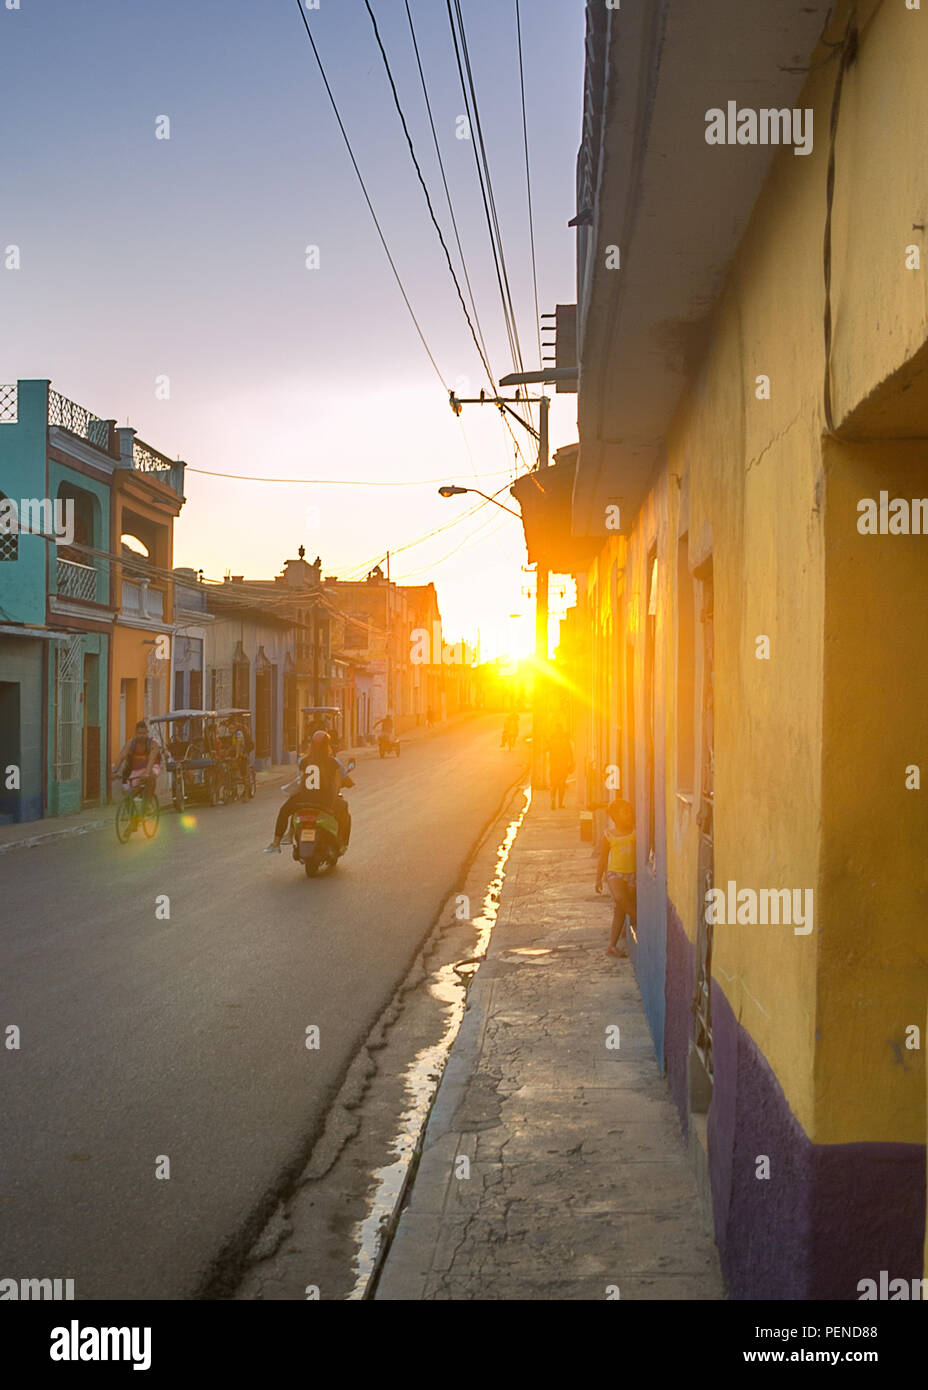 A street of an ancient colonial town in the bright rays of the setting sun. Stock Photo